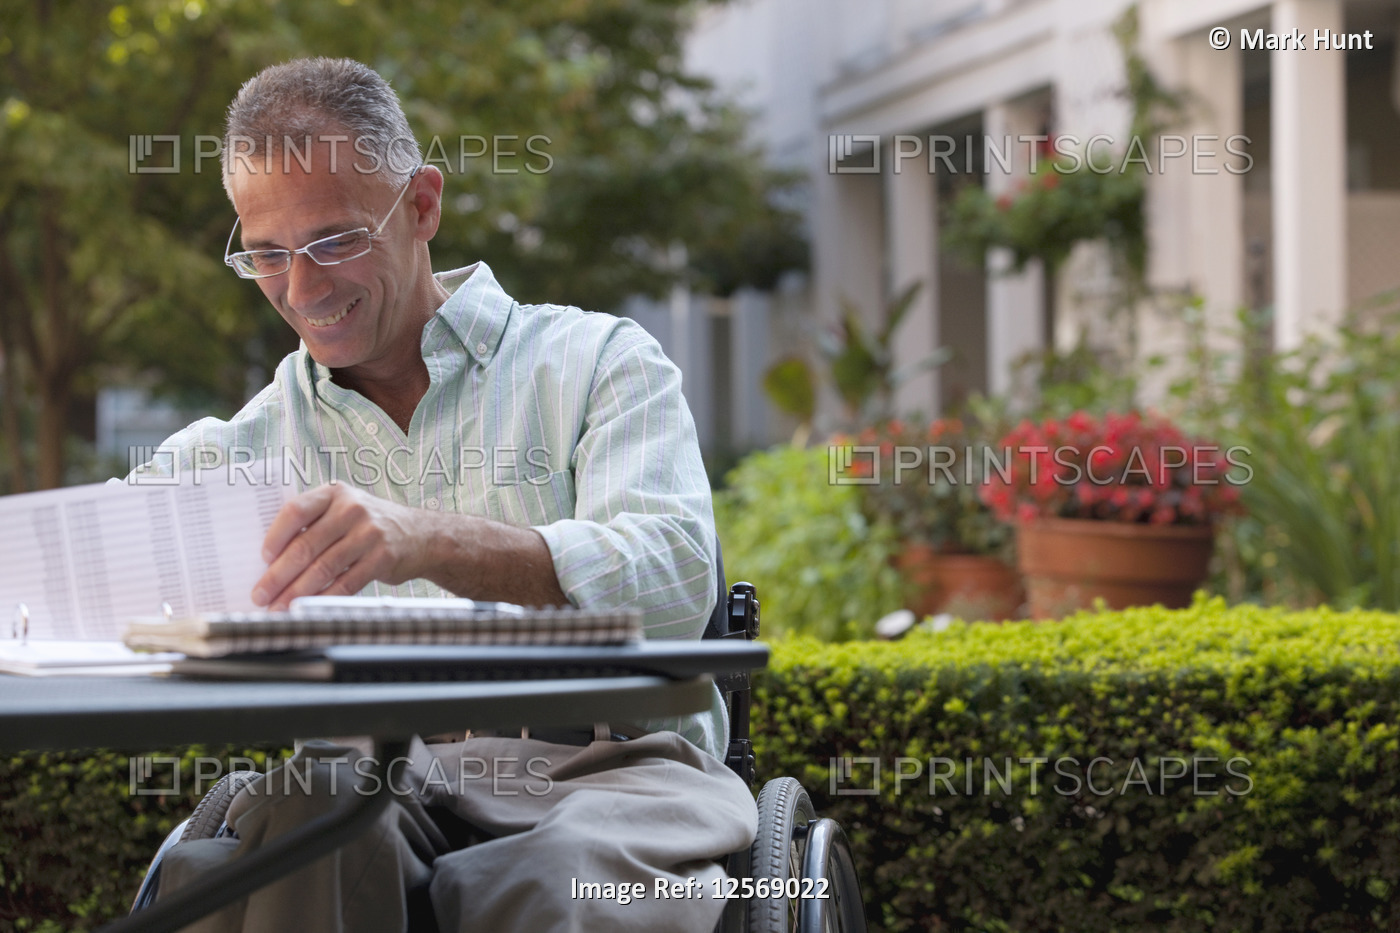 Businessman with spinal cord injury working on documents at a cafÃ©